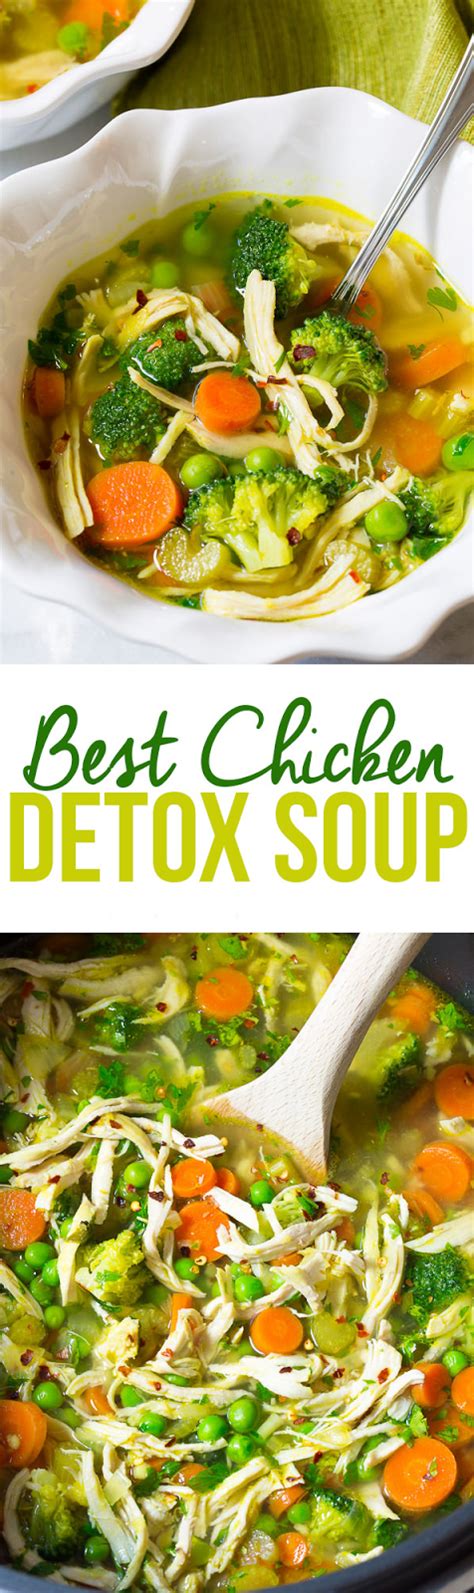 Stress the saute + 10 minutes on your instant pot, and add avocado oil to the. Chicken Detox Soup | Water Detox